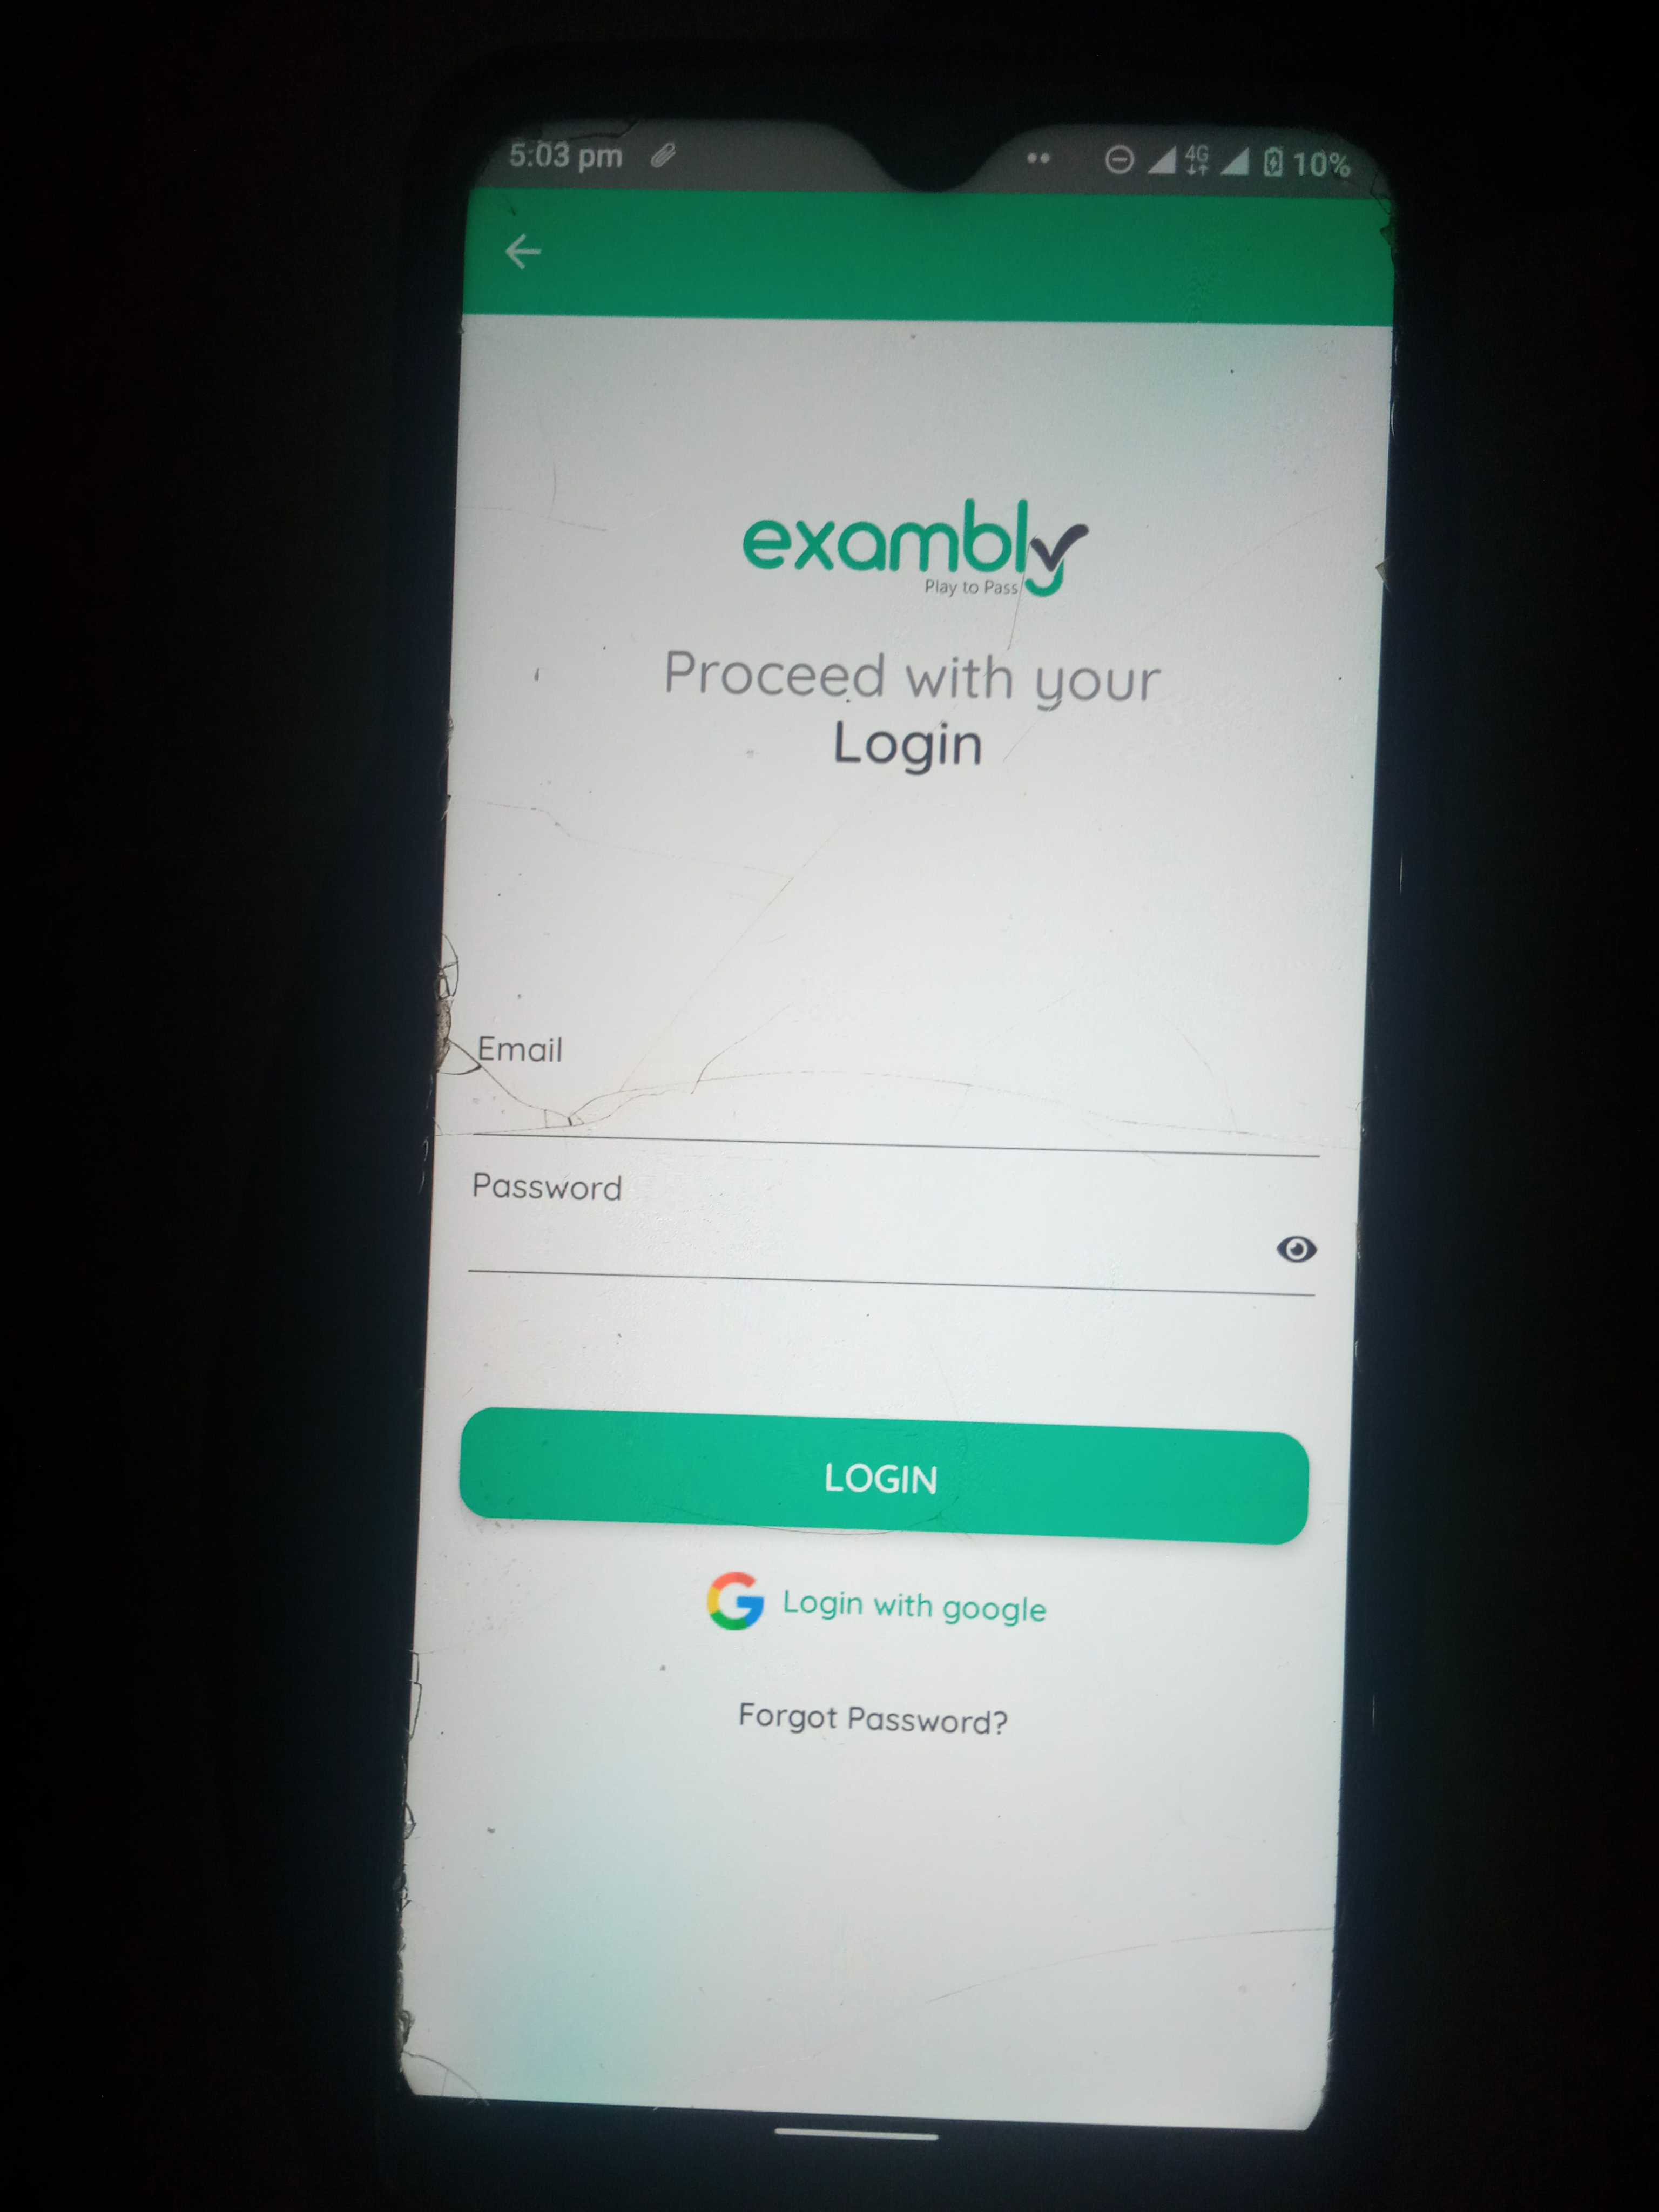 Exambly app promises students straight As in GCE, WAEC and POST UME. This is our thoughts